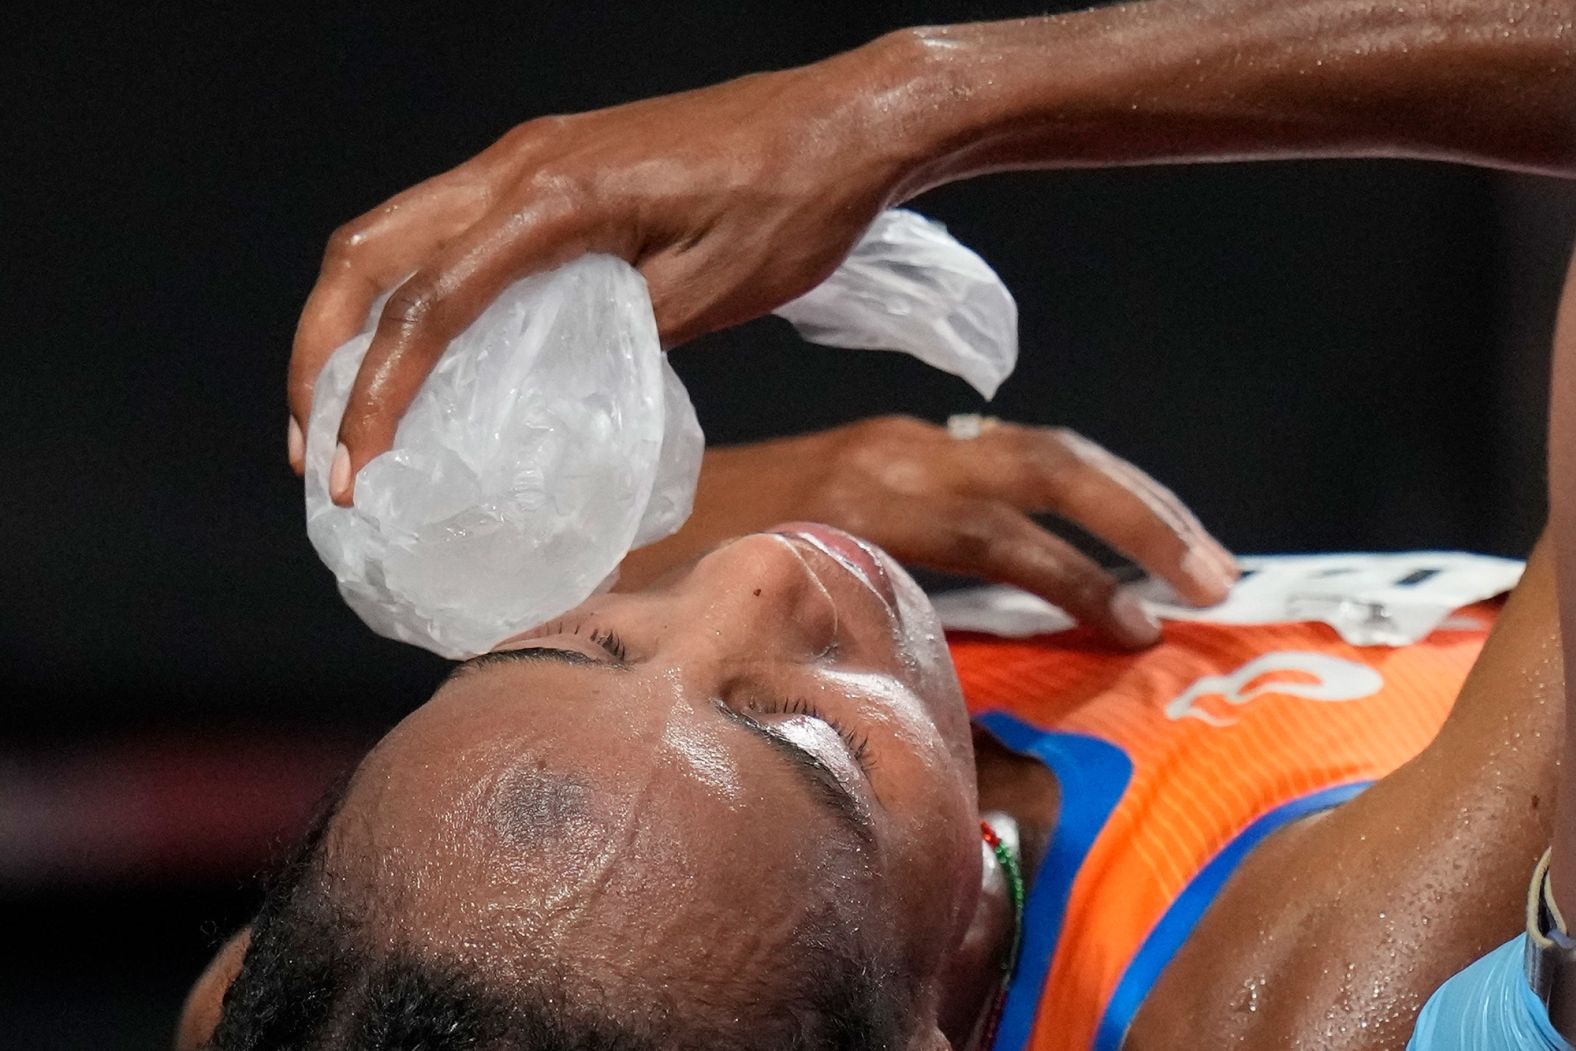 The Netherlands' Sifan Hassan places a bag of ice on her face after <a href="index.php?page=&url=https%3A%2F%2Fwww.cnn.com%2Fworld%2Flive-news%2Ftokyo-2020-olympics-08-07-21-spt%2Fh_c82d5d9a6c216a4f0d275f26f95aaa58" target="_blank">winning gold in the 10,000 meters</a> on August 7. Hassan also won the 5,000 meters in Tokyo and finished third in the 1,500. She's the first person in Olympic history to complete a medley of medals across both the middle- and long-distance events in a single Games.